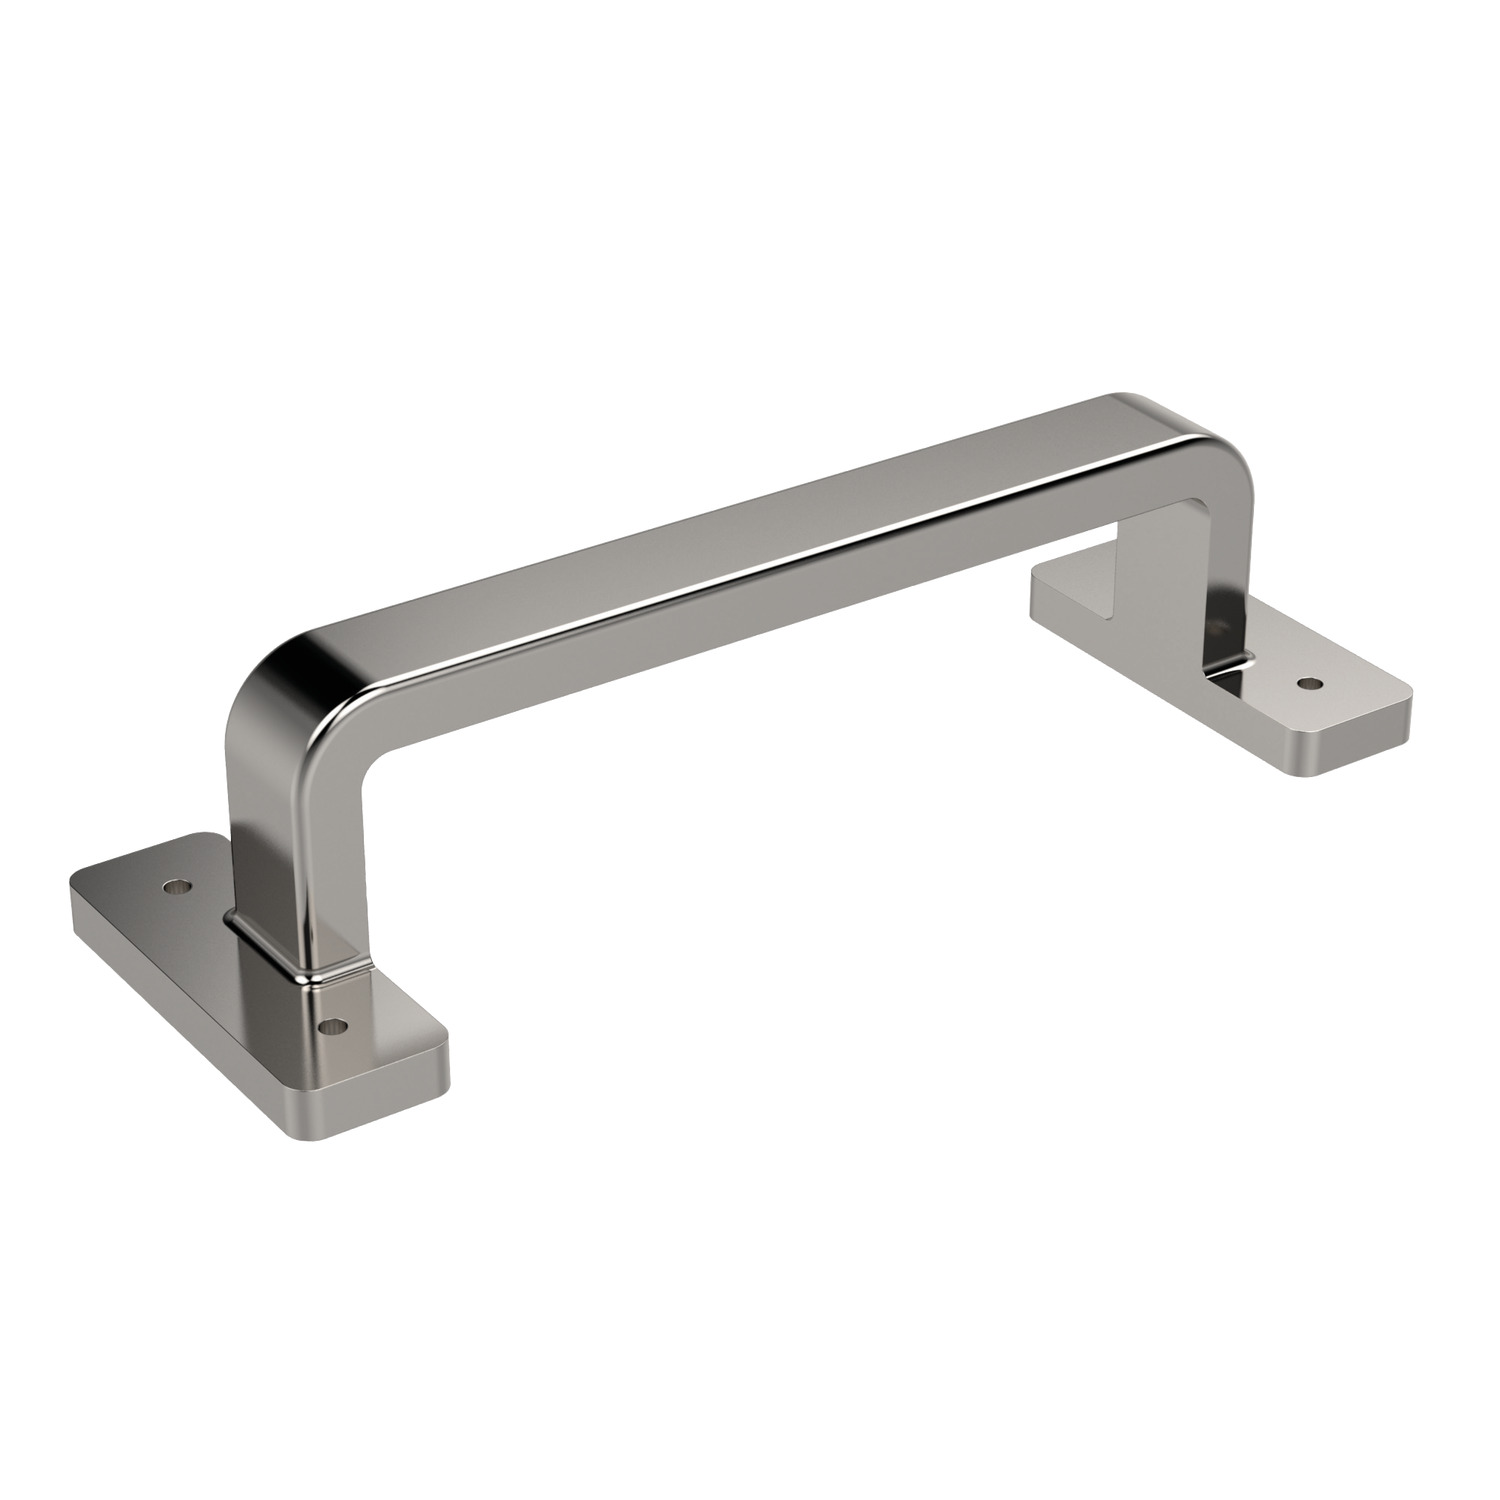 78950 - Pull Handles, Stainless Steel